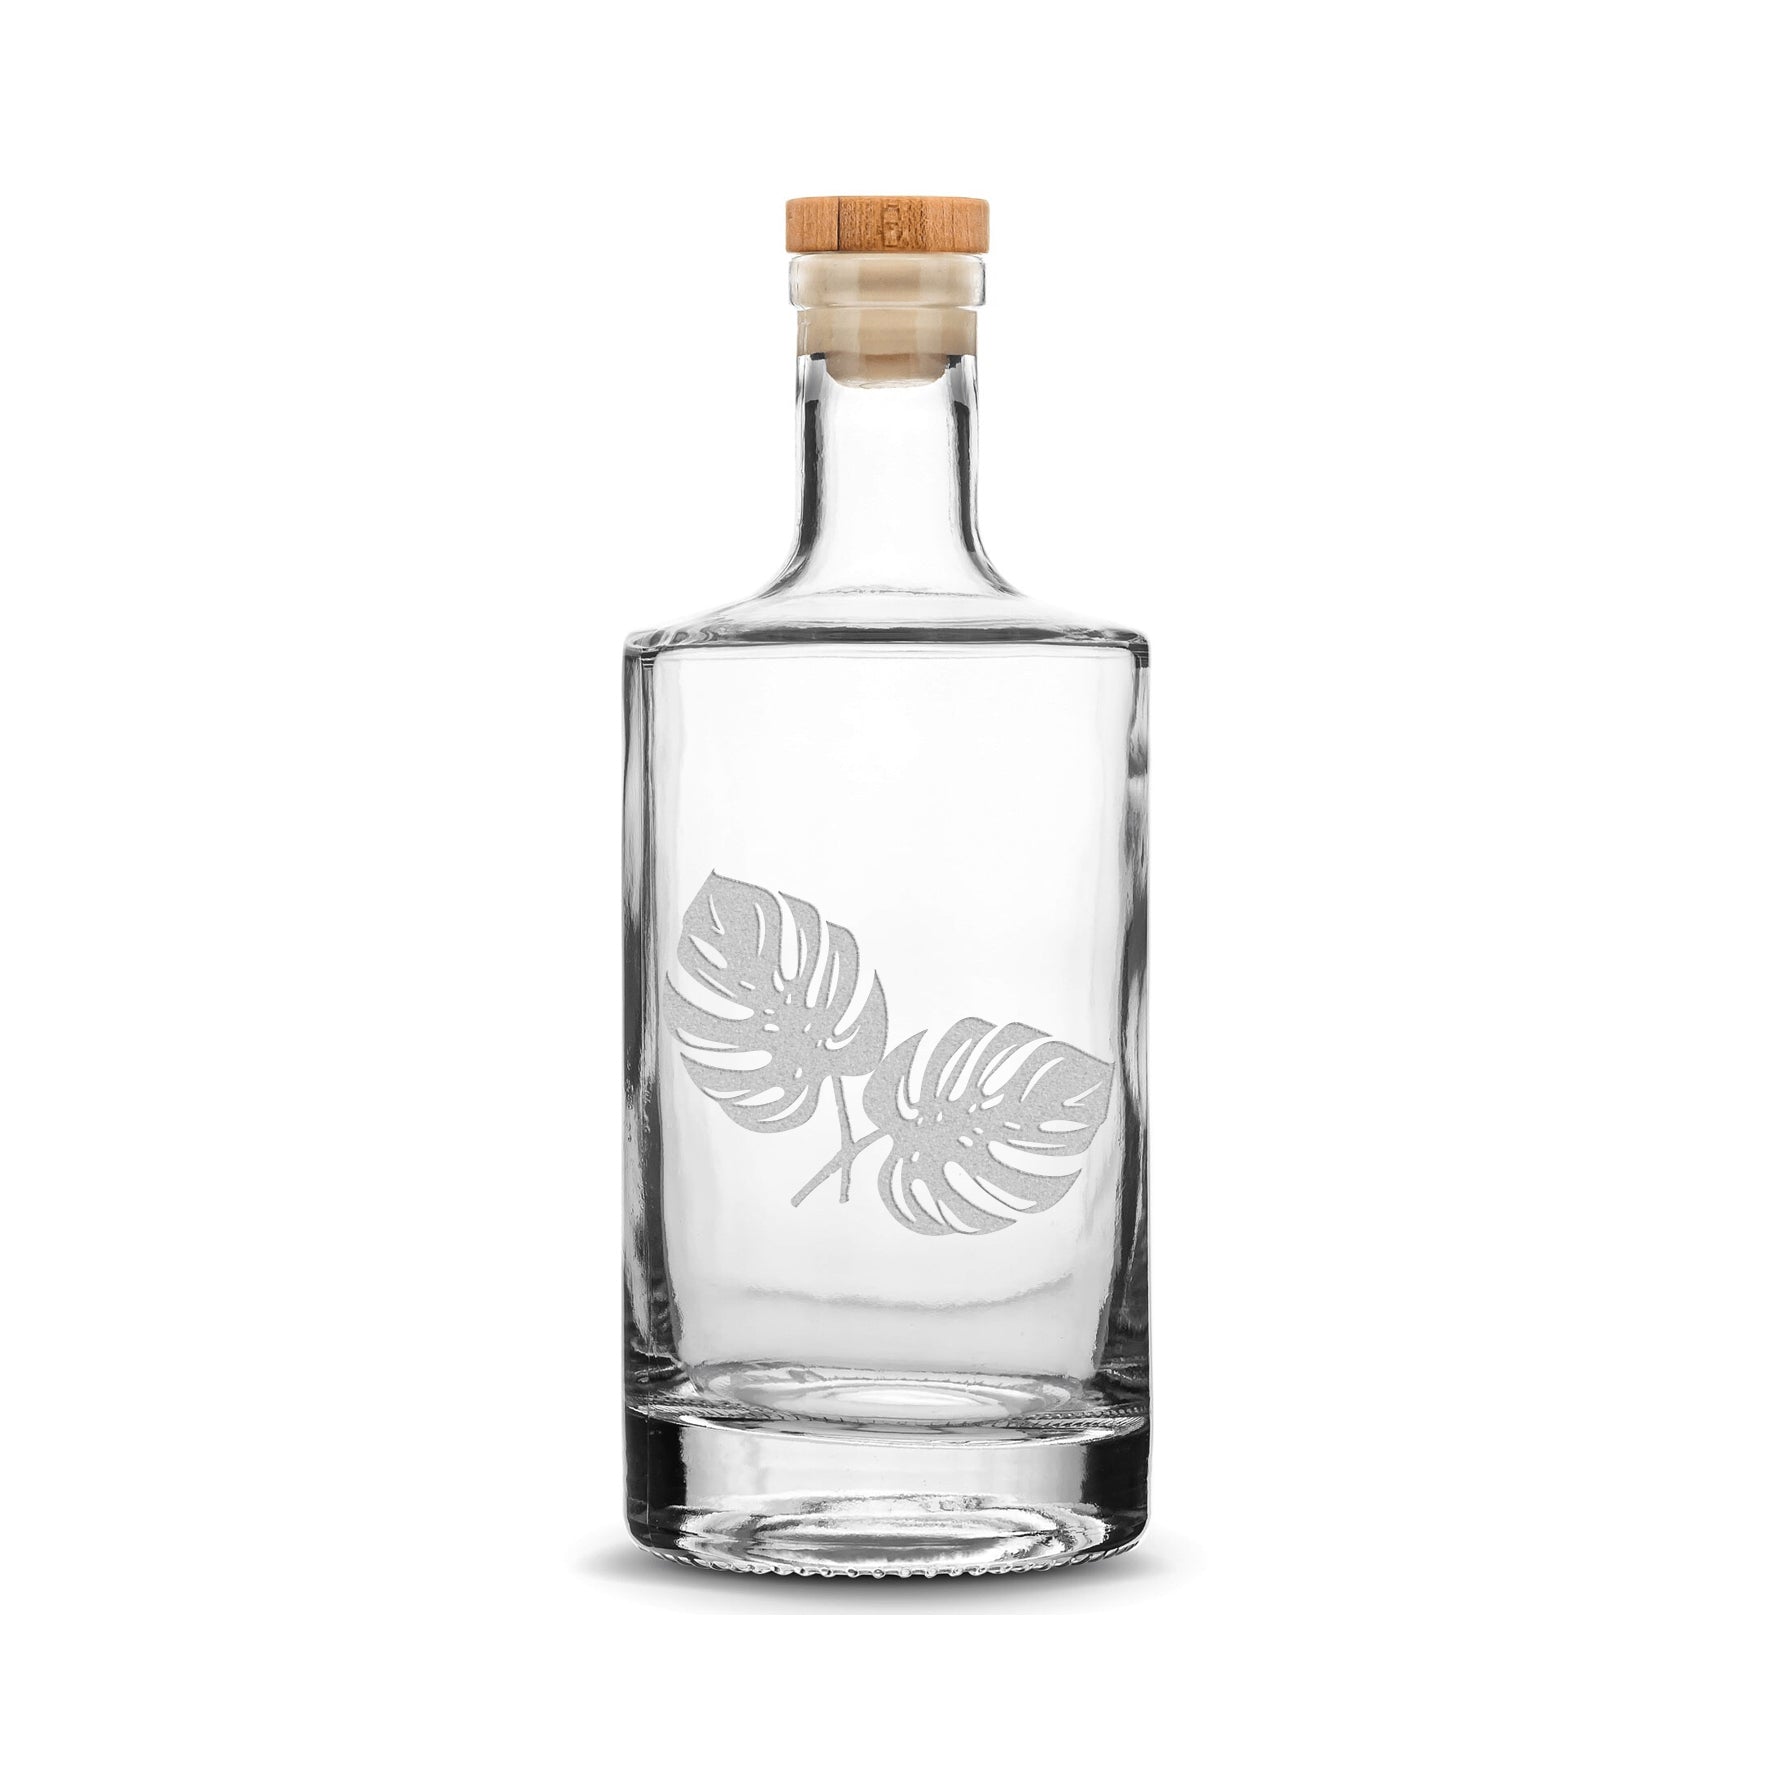 Customizable, Premium Refillable Small Jersey Style Liquor Bottle, Handmade, Handblown, Hand Etched Gifts, Sand Carved, 375ml, Laser Etched or Hand Etched